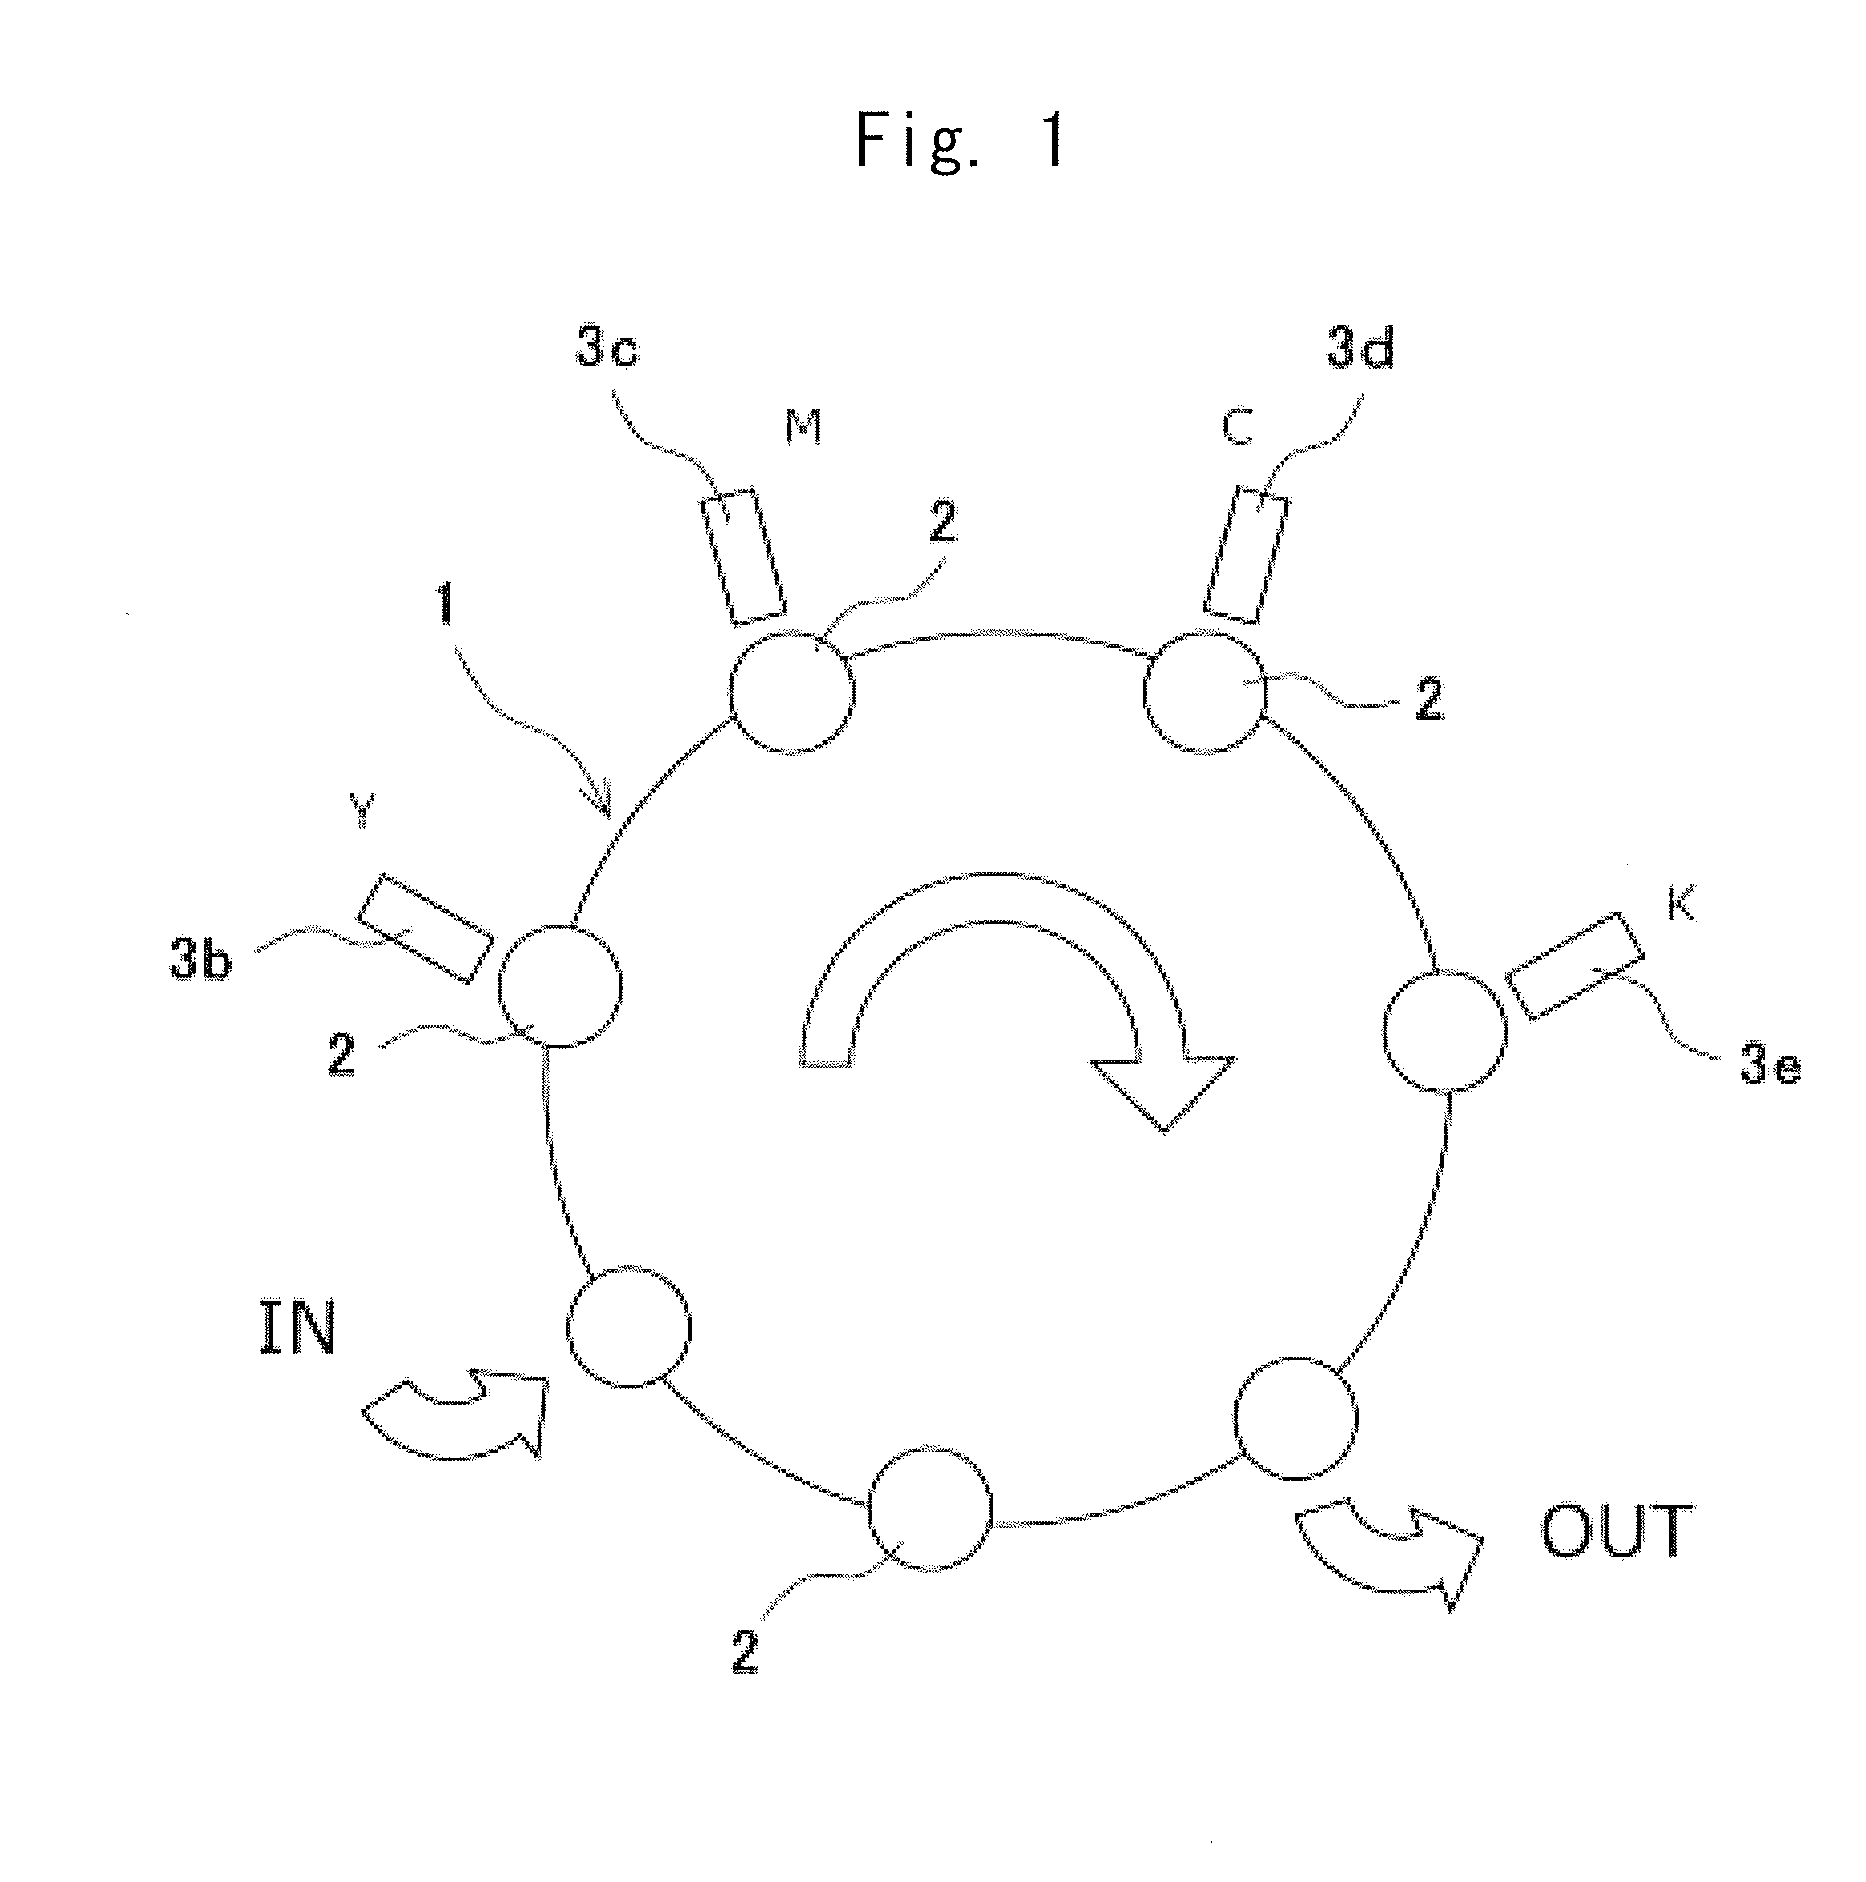 Ink-jet printing apparatus and method of printing seamless cans by using the same printing apparatus